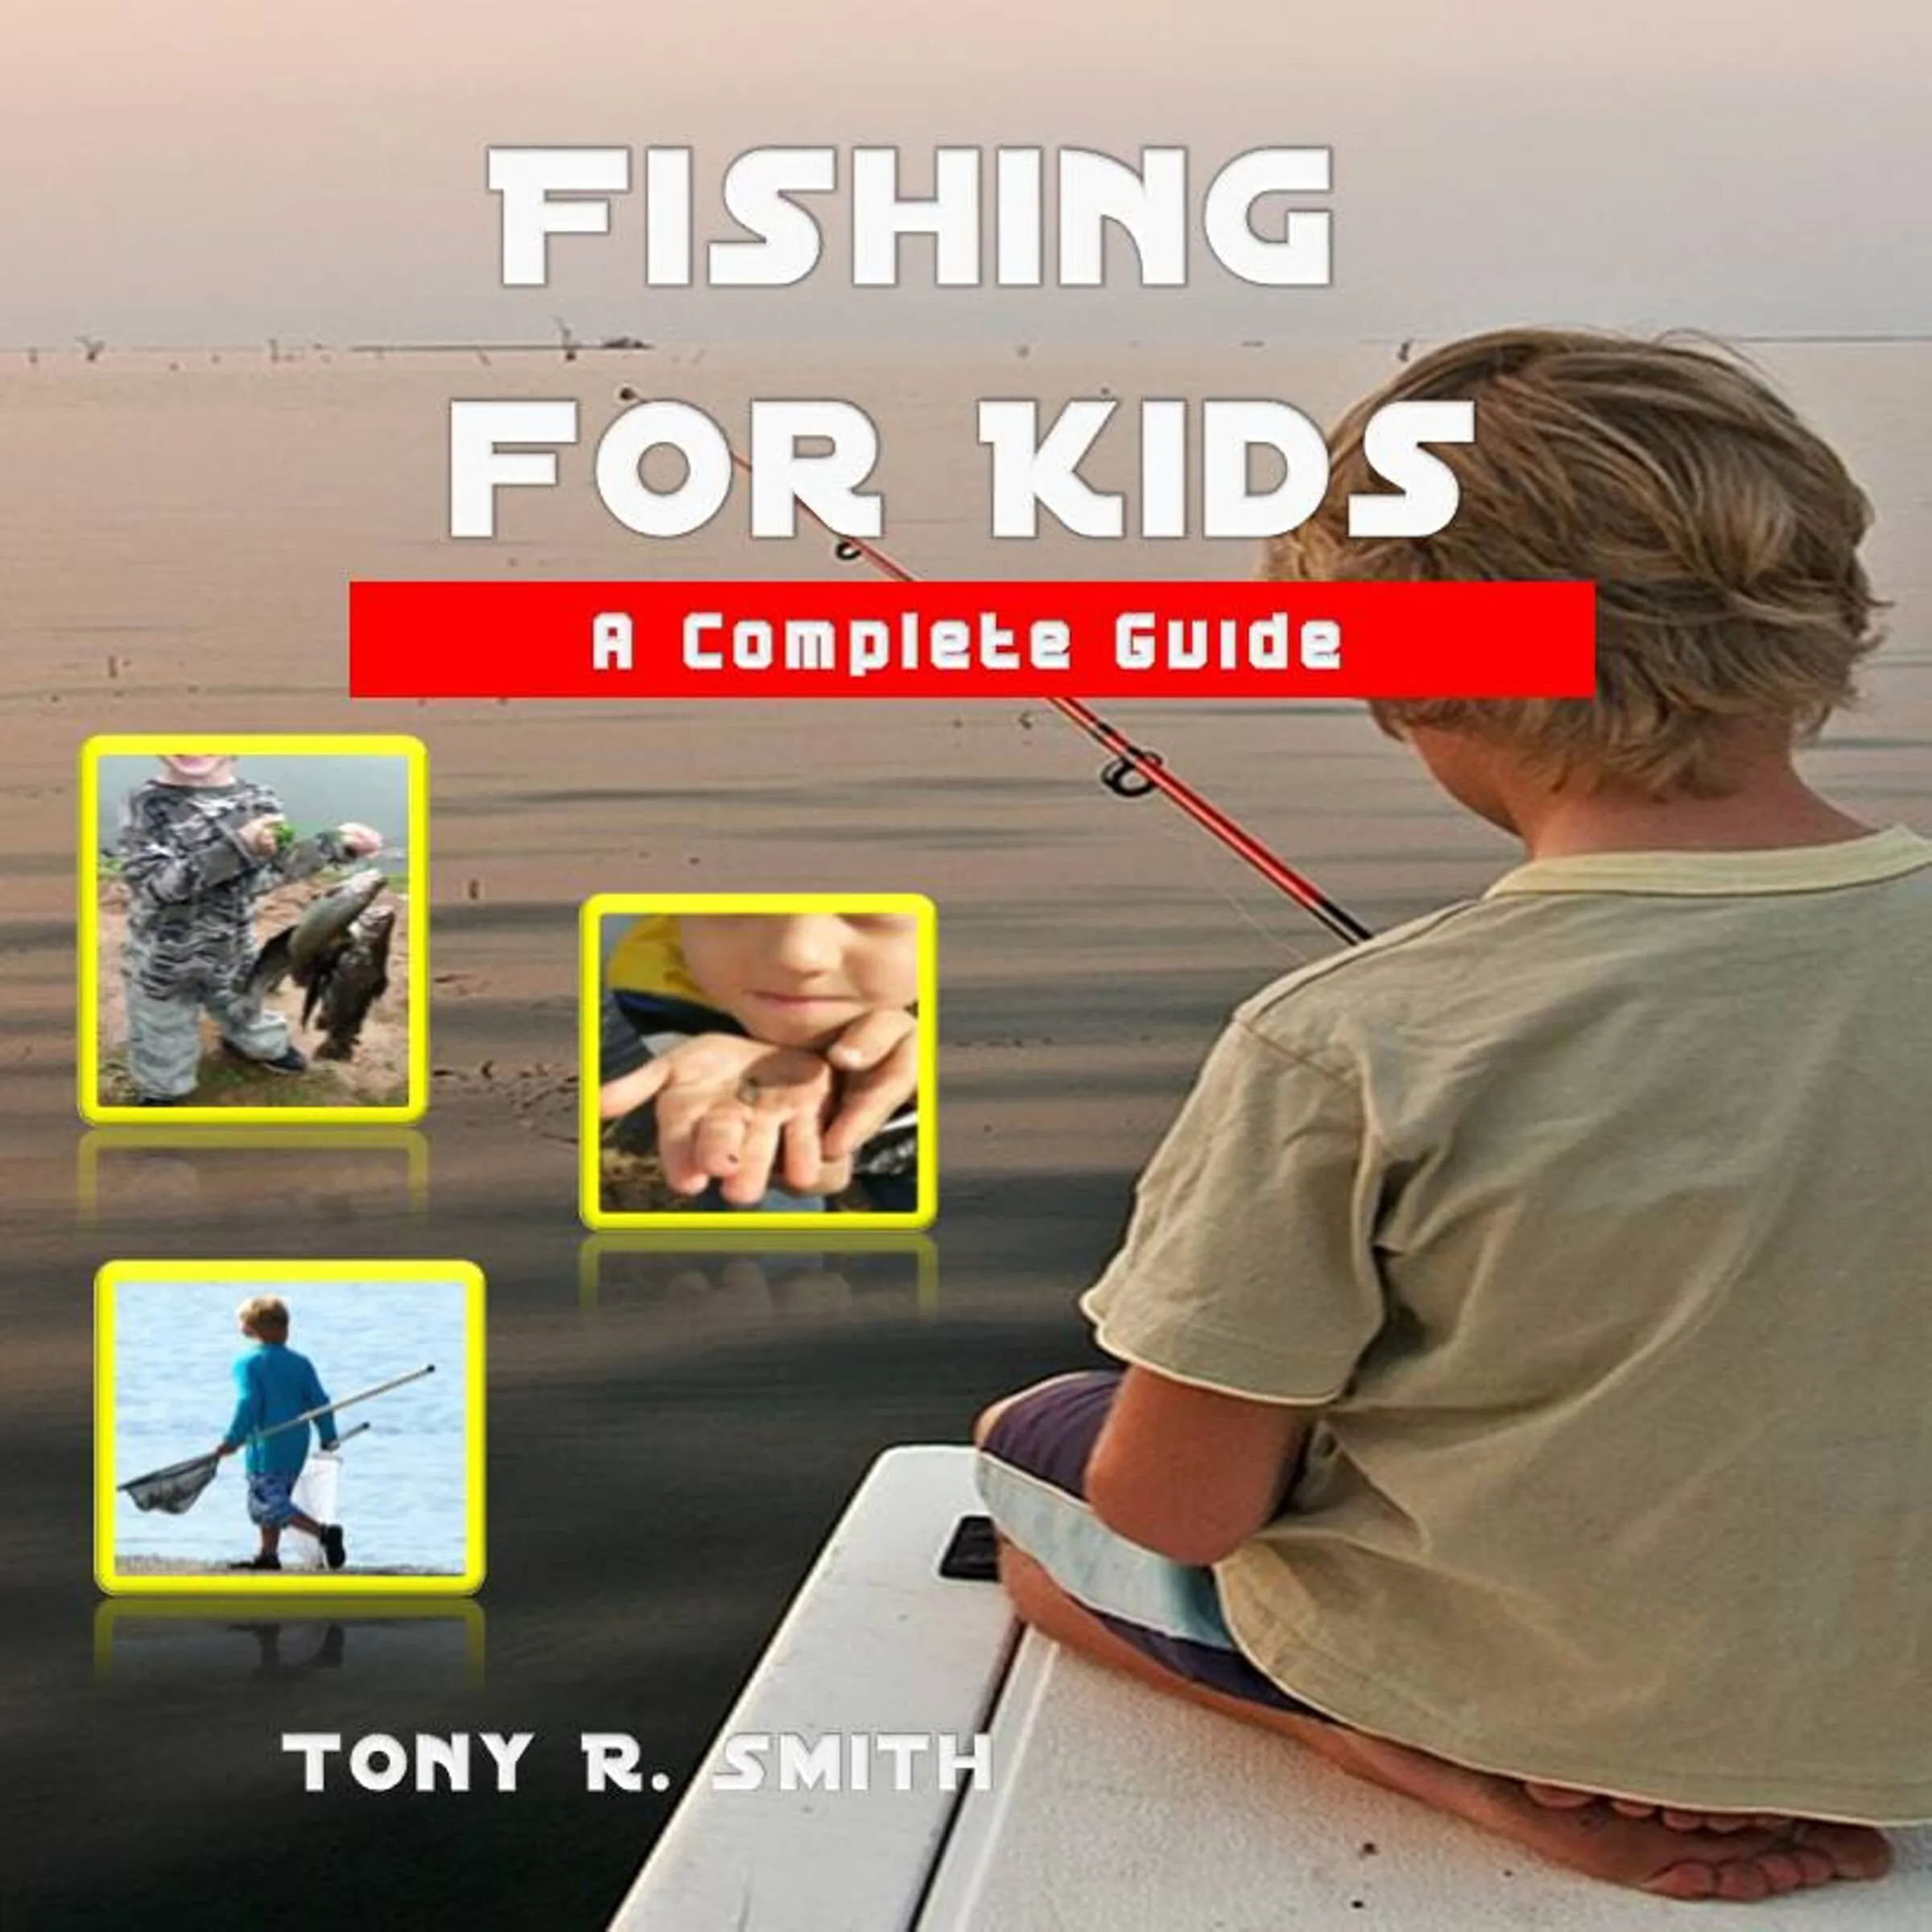 Fishing for Kids: A Complete Guide Audiobook by Tony R. Smith